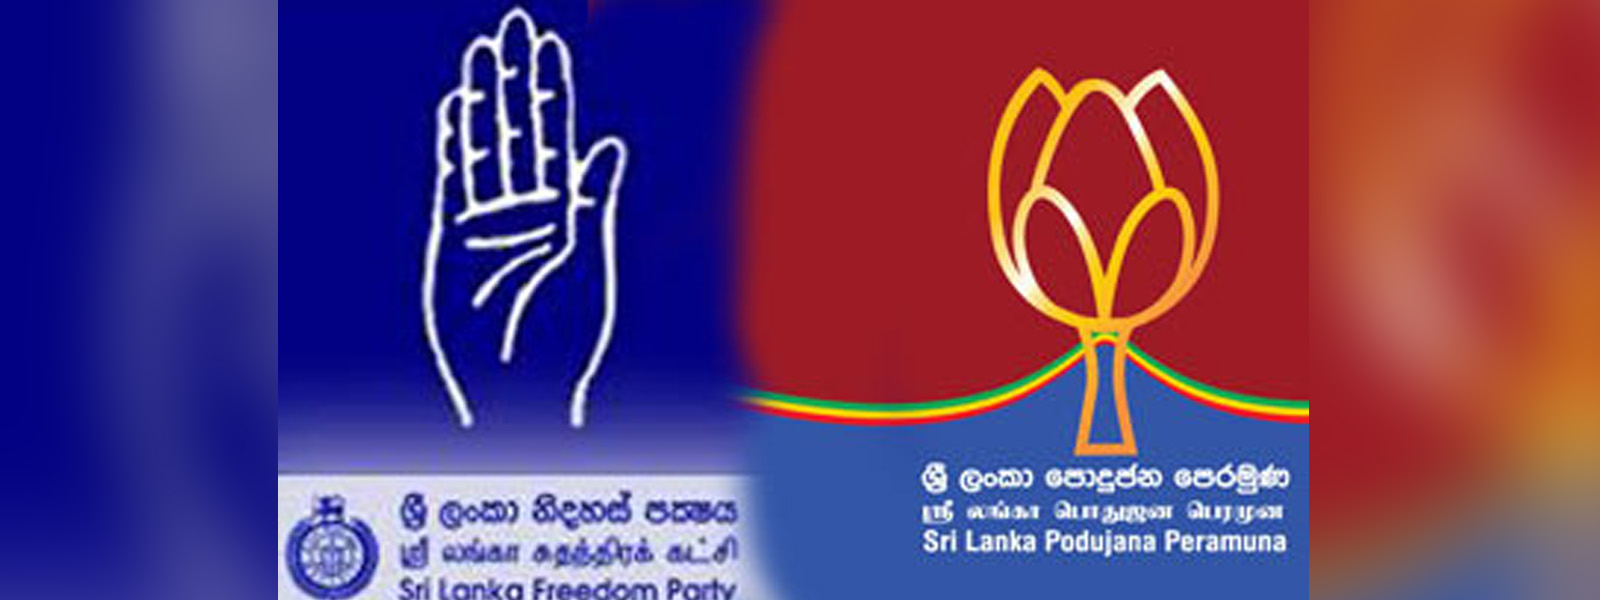 WATCH: MoU between SLFP and SLPP signed 